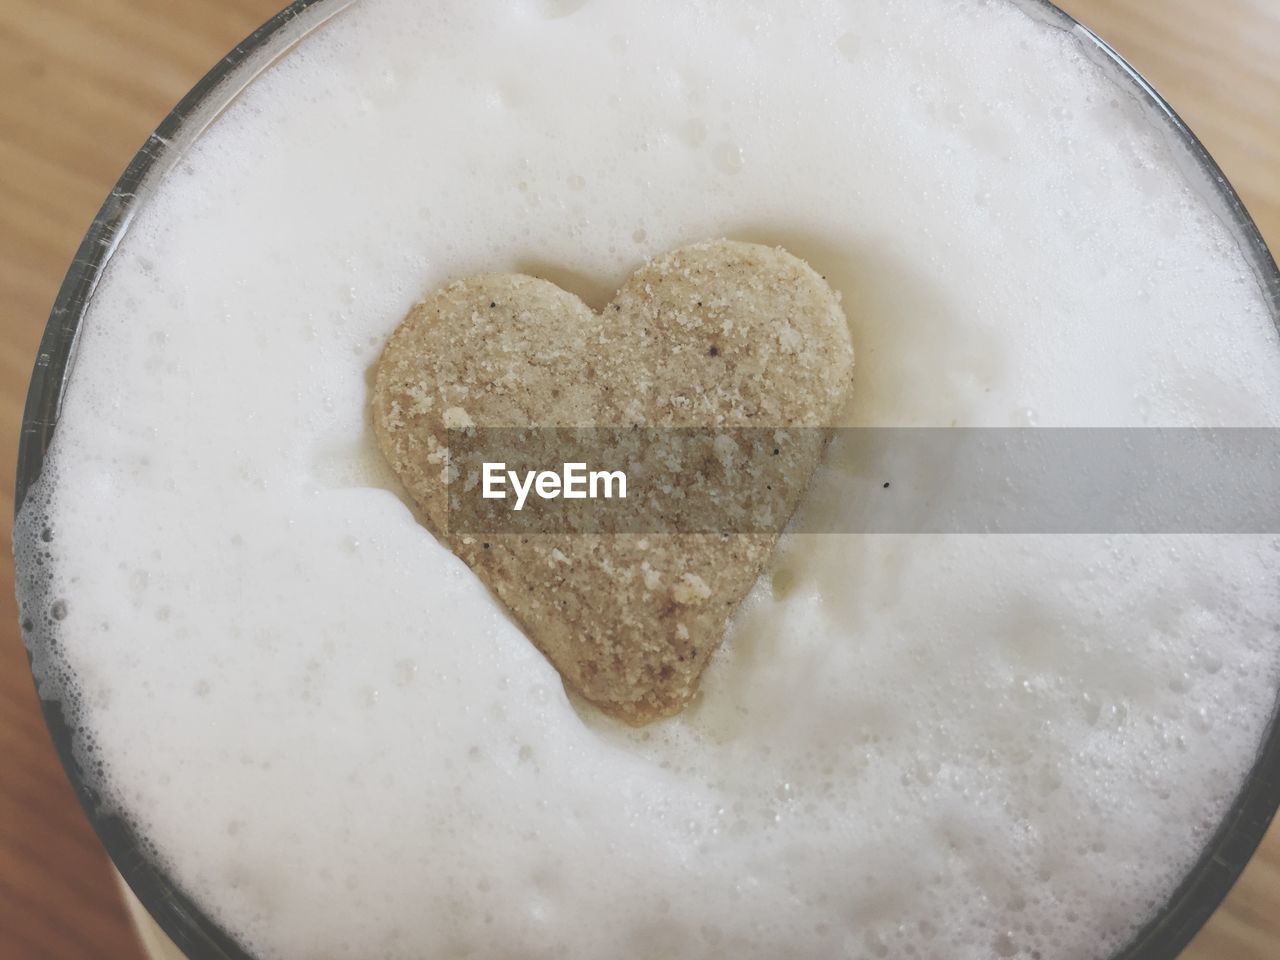 HIGH ANGLE VIEW OF HEART SHAPE BREAD IN GLASS